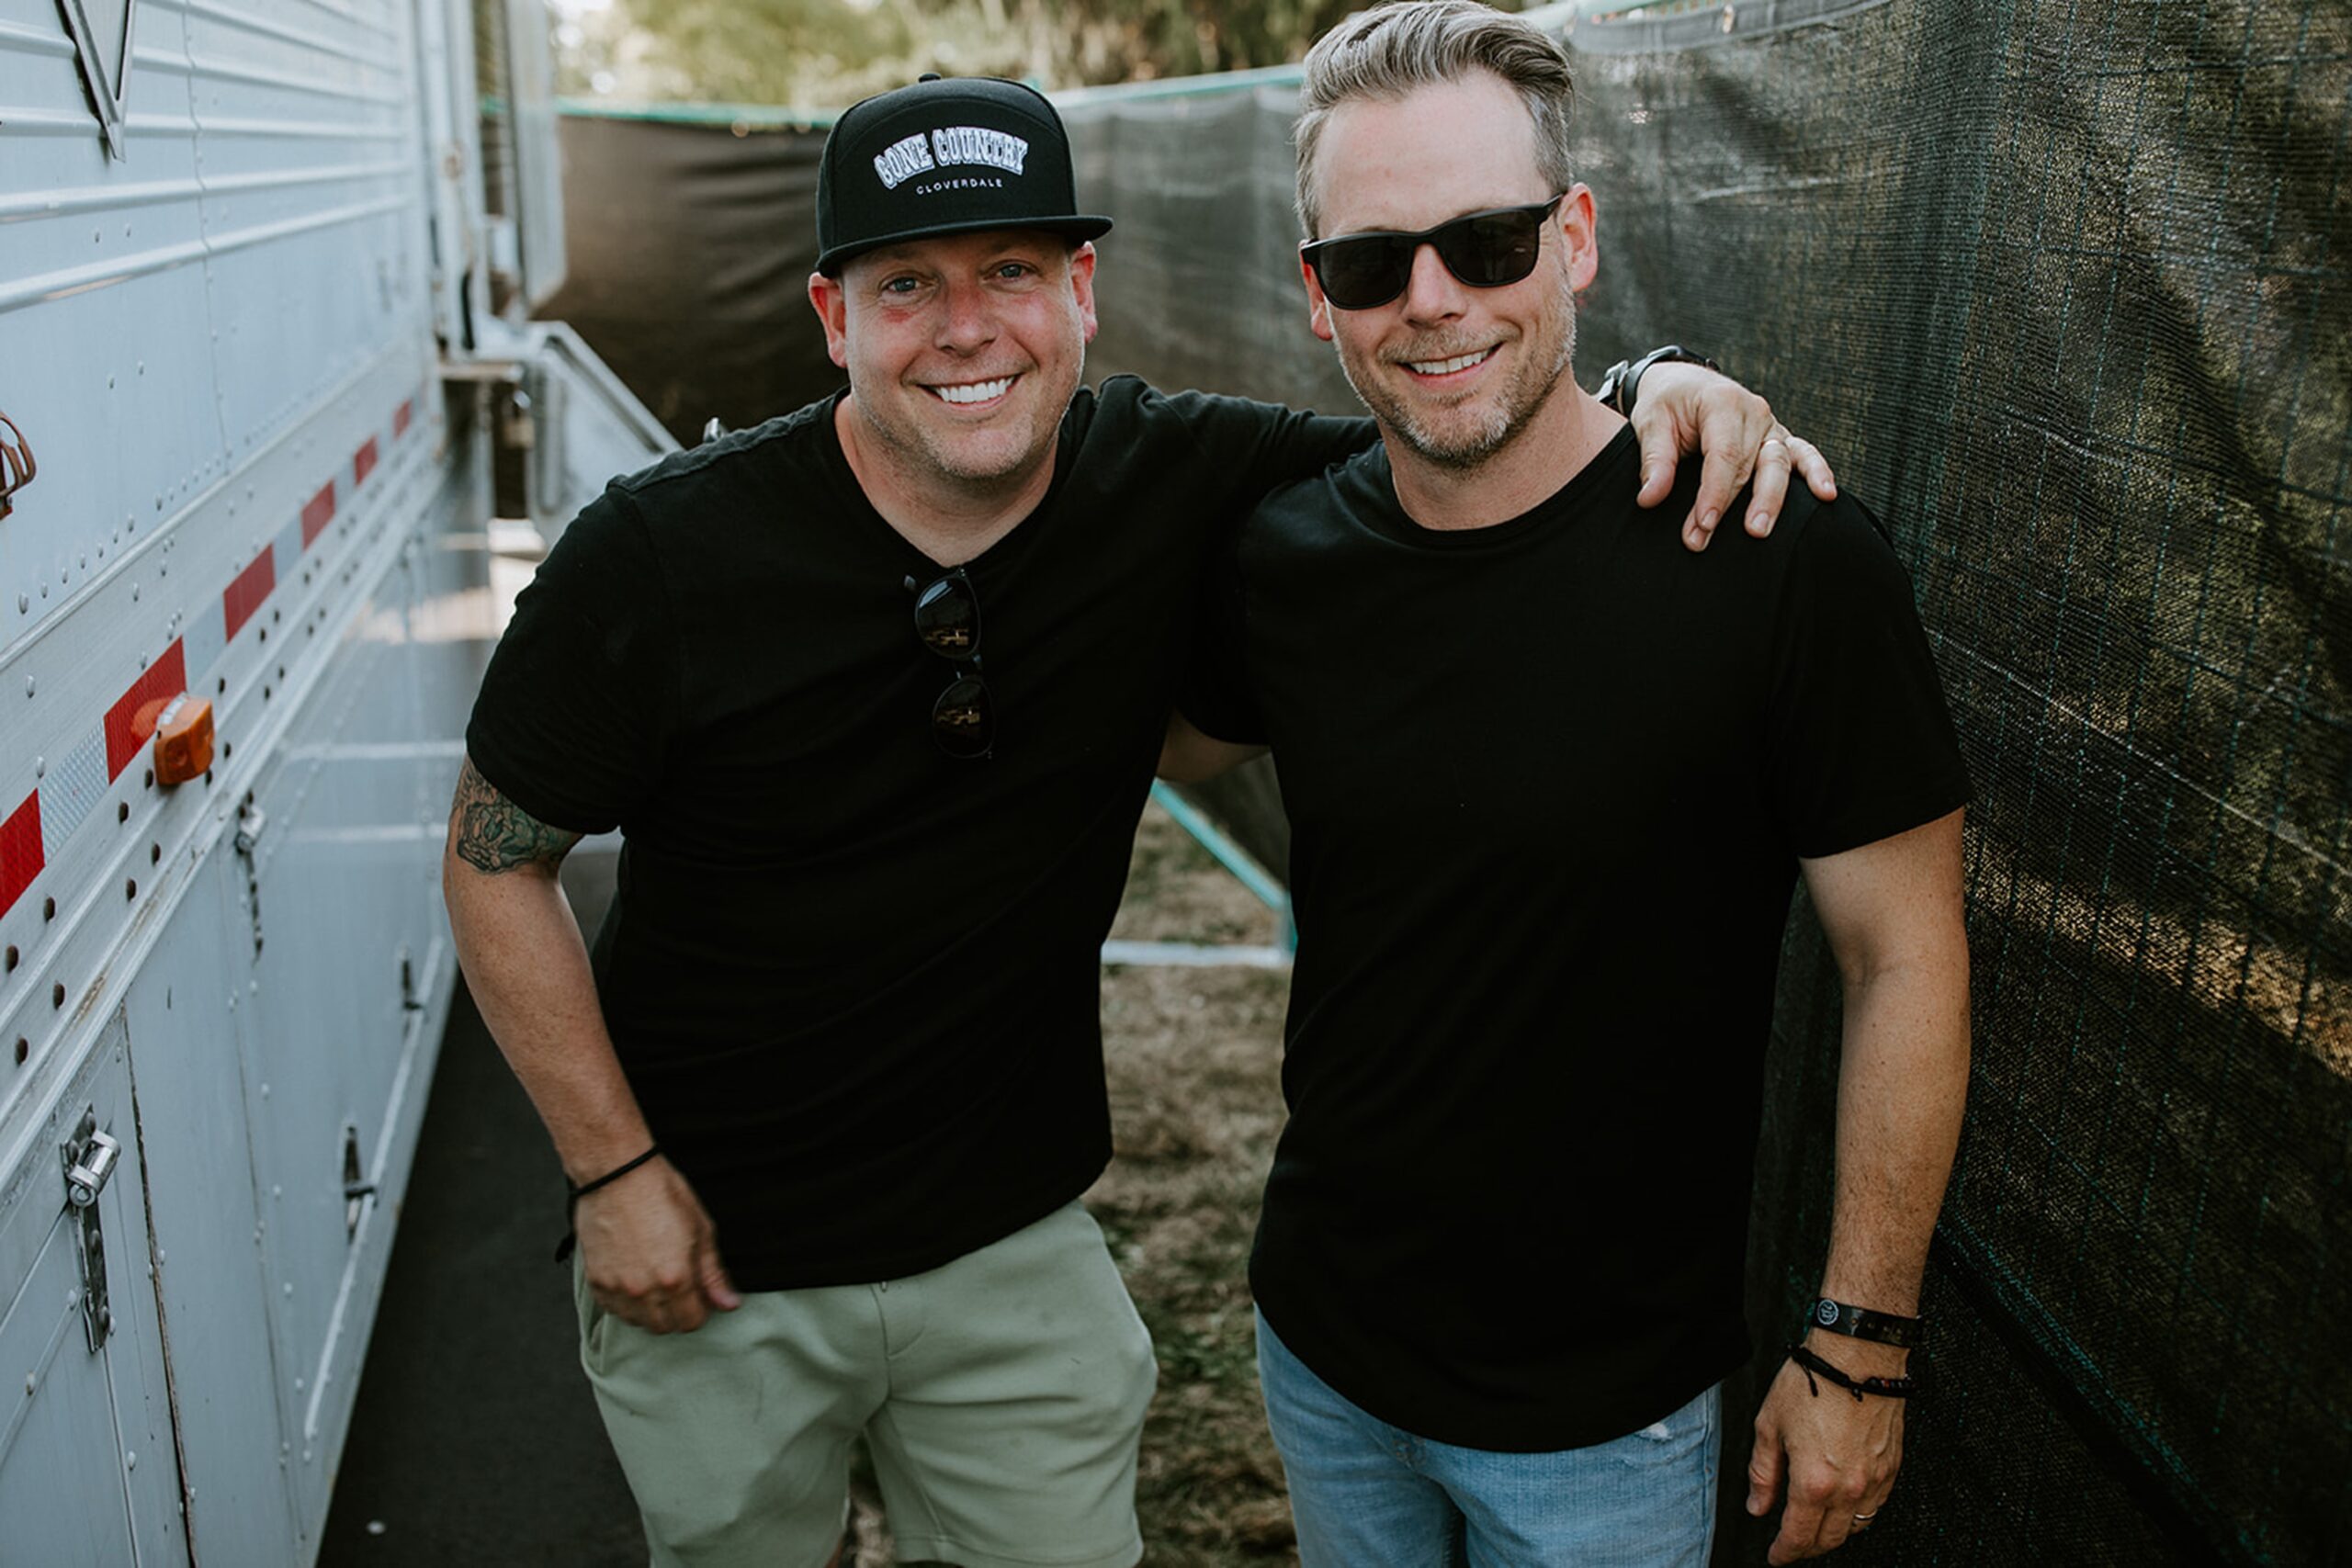 Brothers Chris and Jamie smile with arms wrapped around each others shoulders at Gone Country Concert